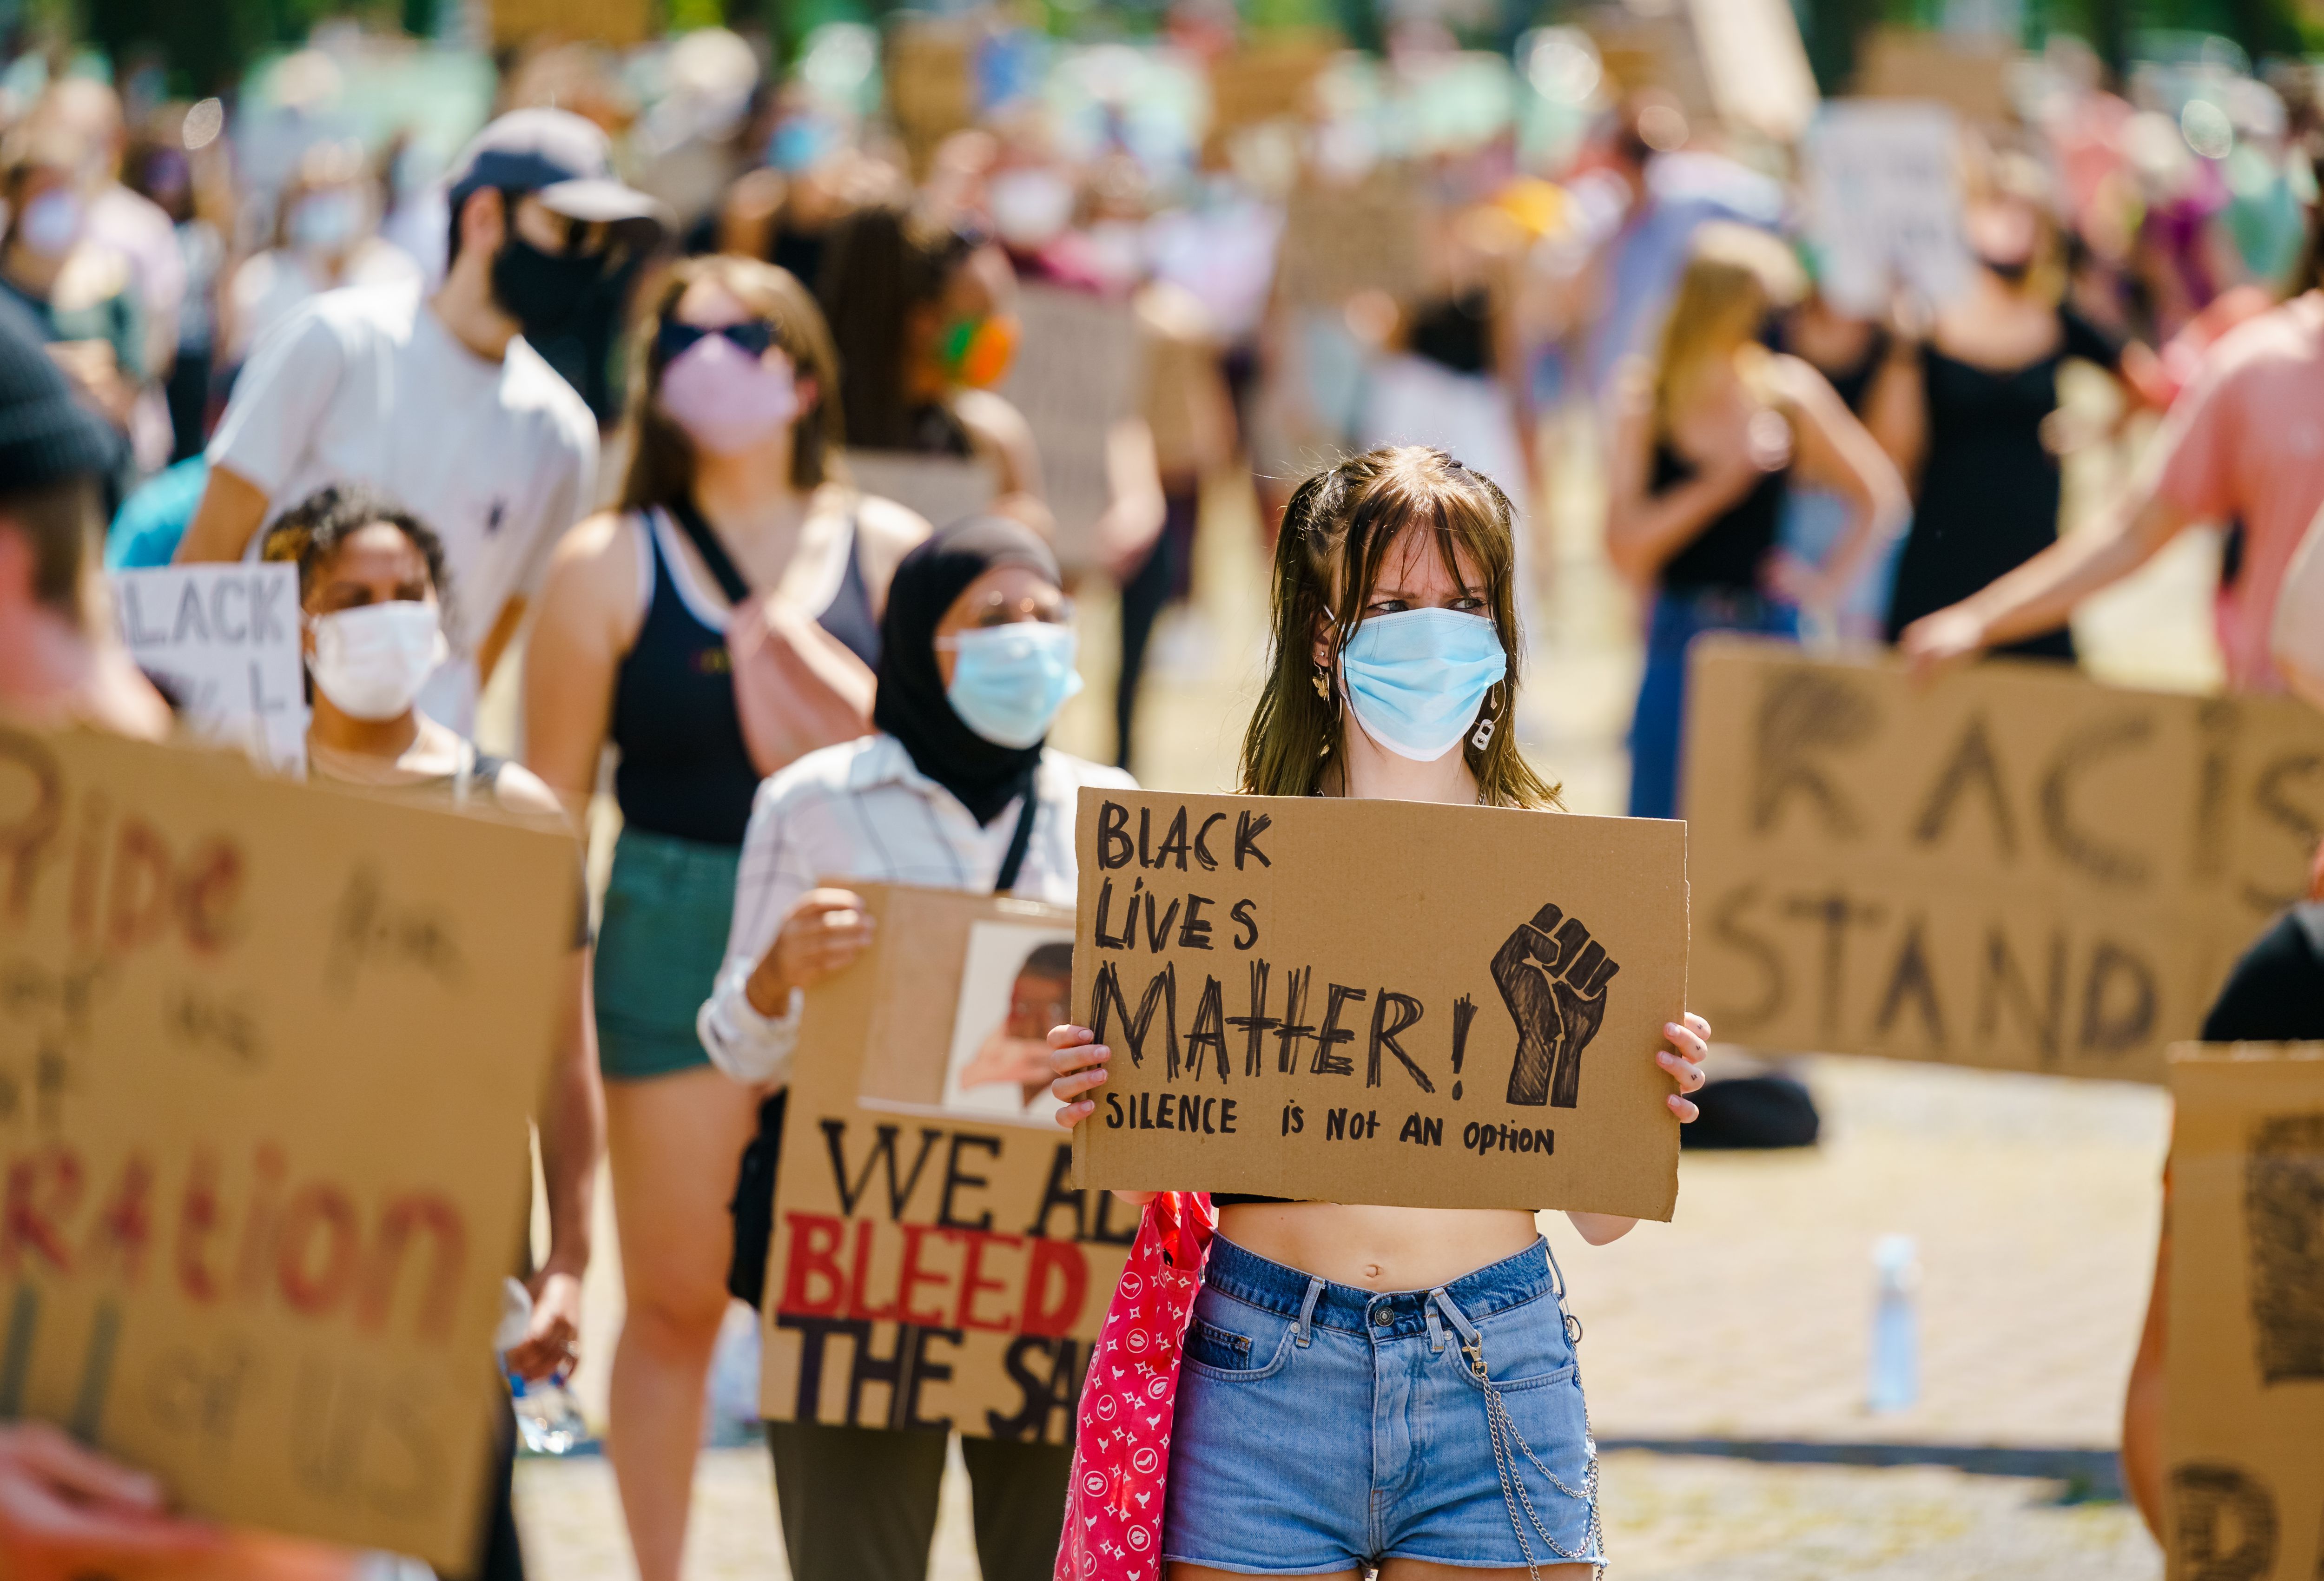 Two masked women hold signs that read "Black Lives Matter"